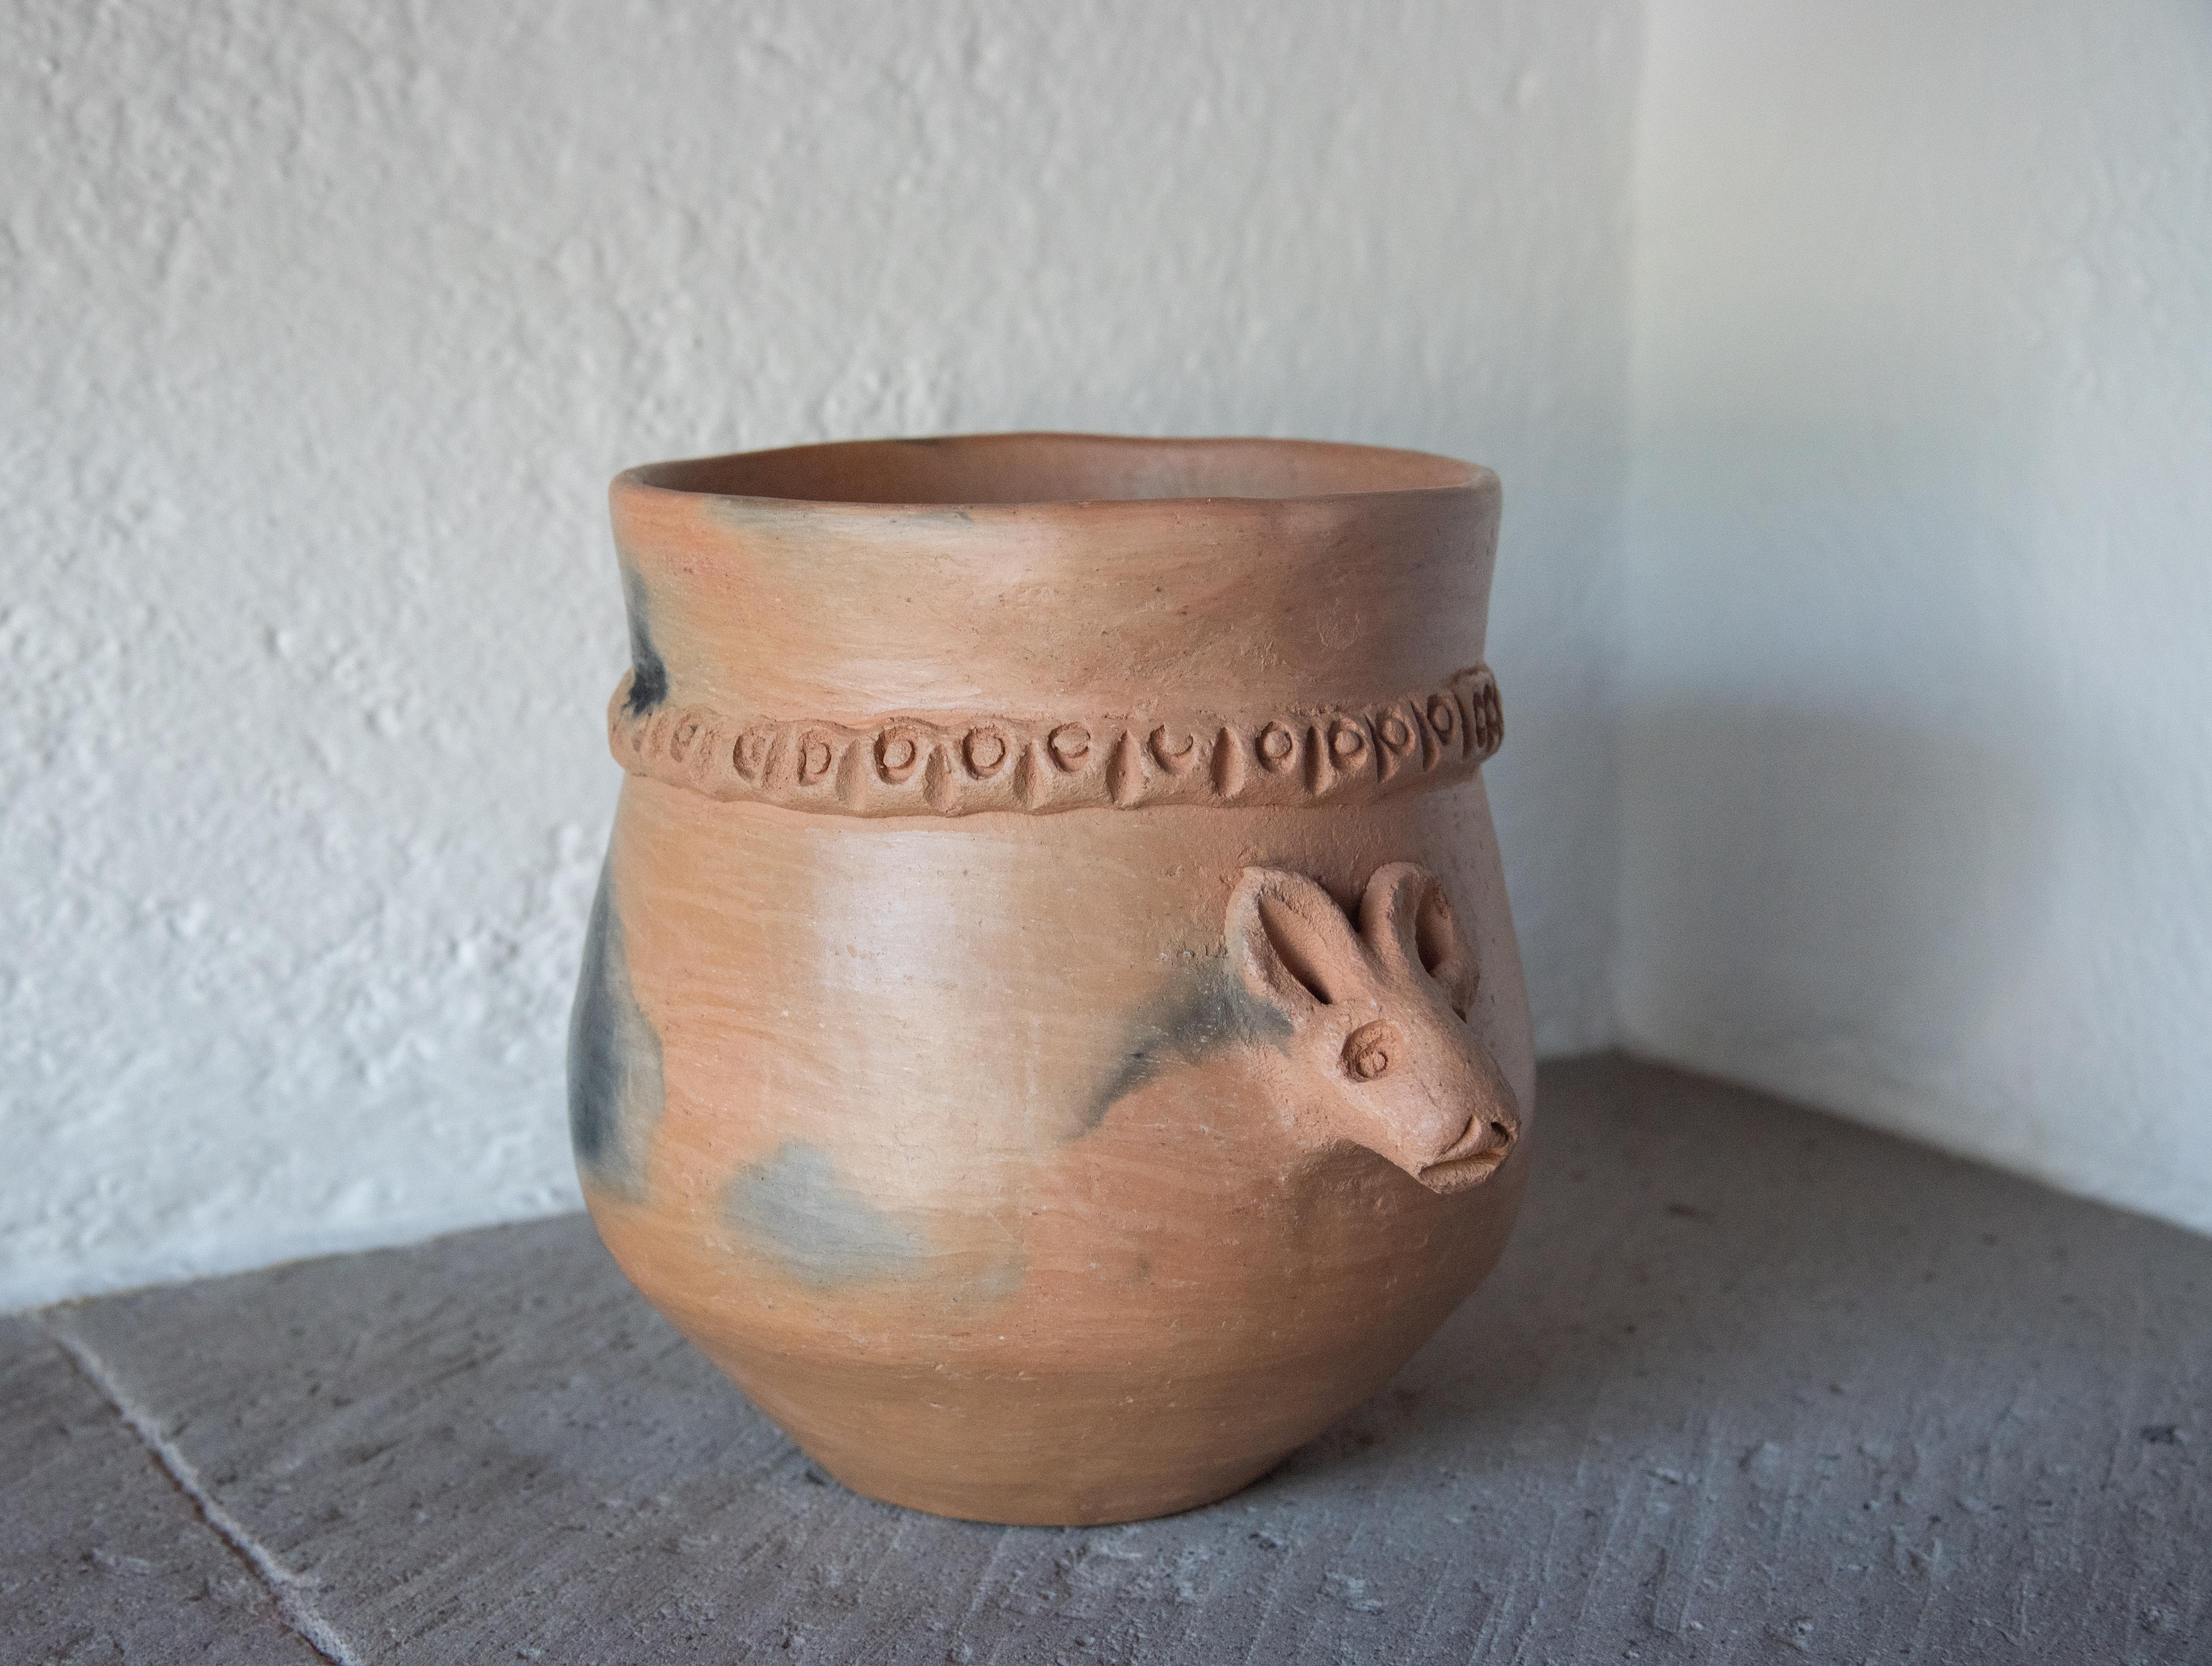 This humorous piece is a one of a kind by master artisan Silvia Martínez. Silvia sculpts a mouse's head on the front of the pot and the tail for the back of the pot. Made with natural clay from the region in a rustic style. The burnished clay